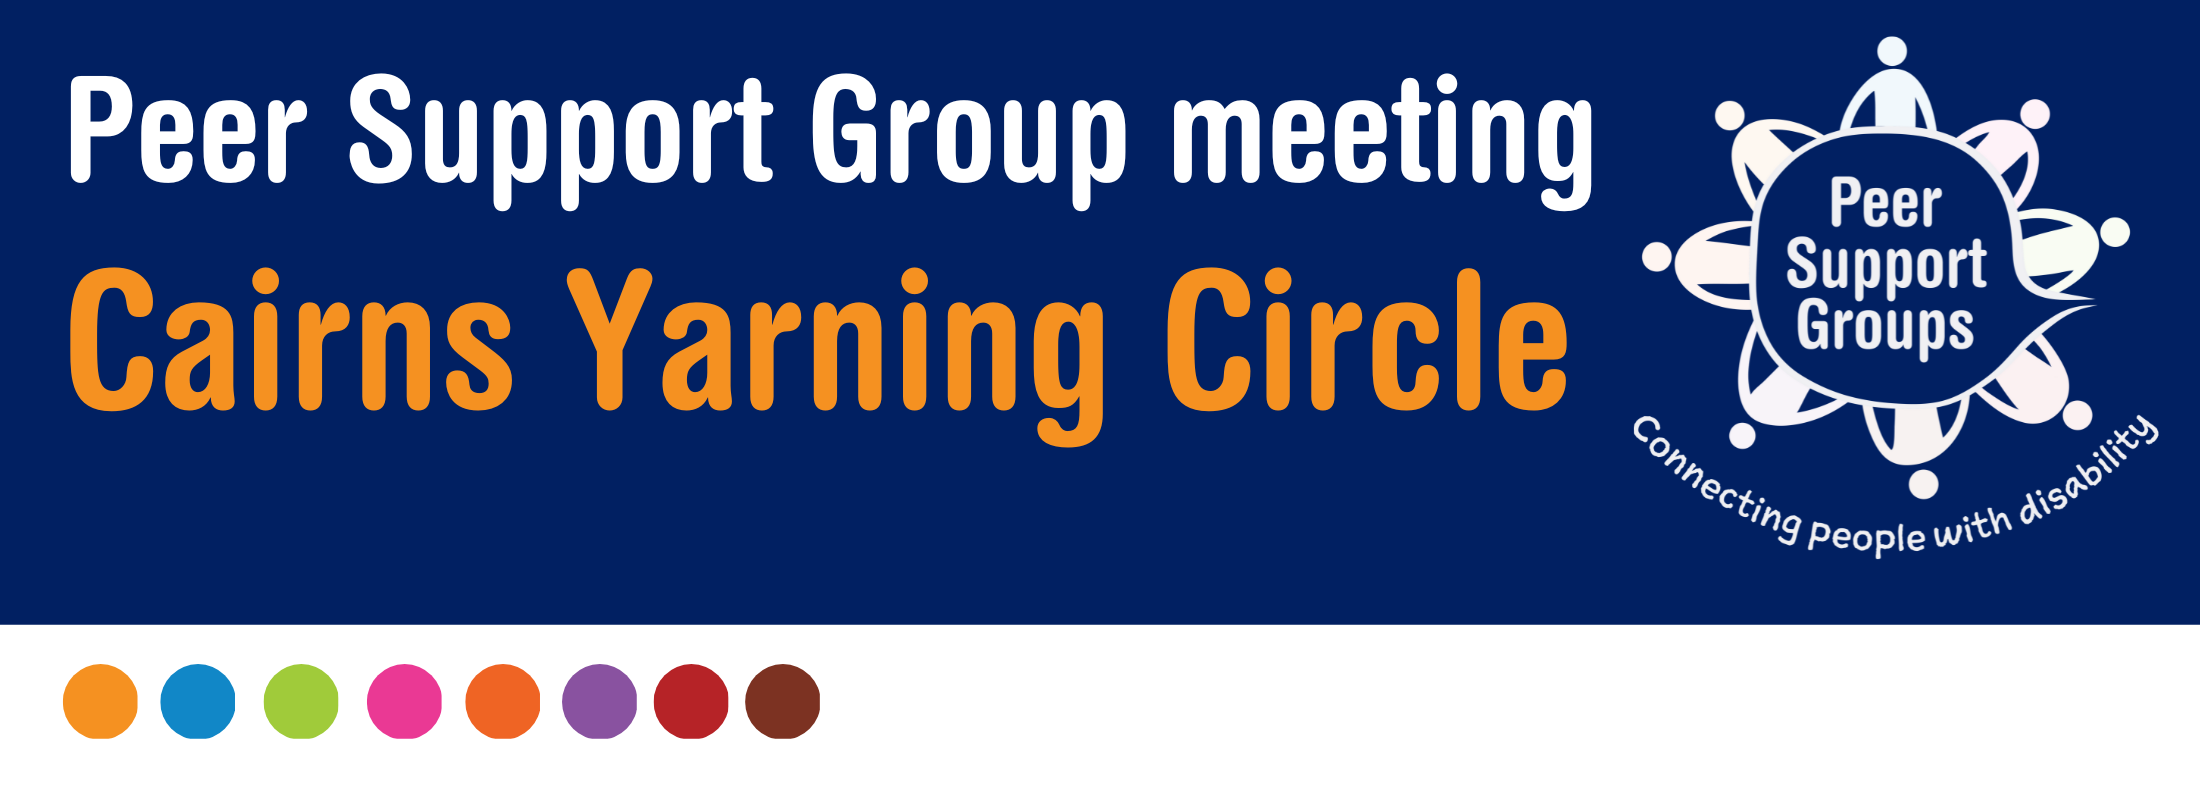 Dark blue back ground with a text saying Peer Support Group meeting - Carins Yarning Circle